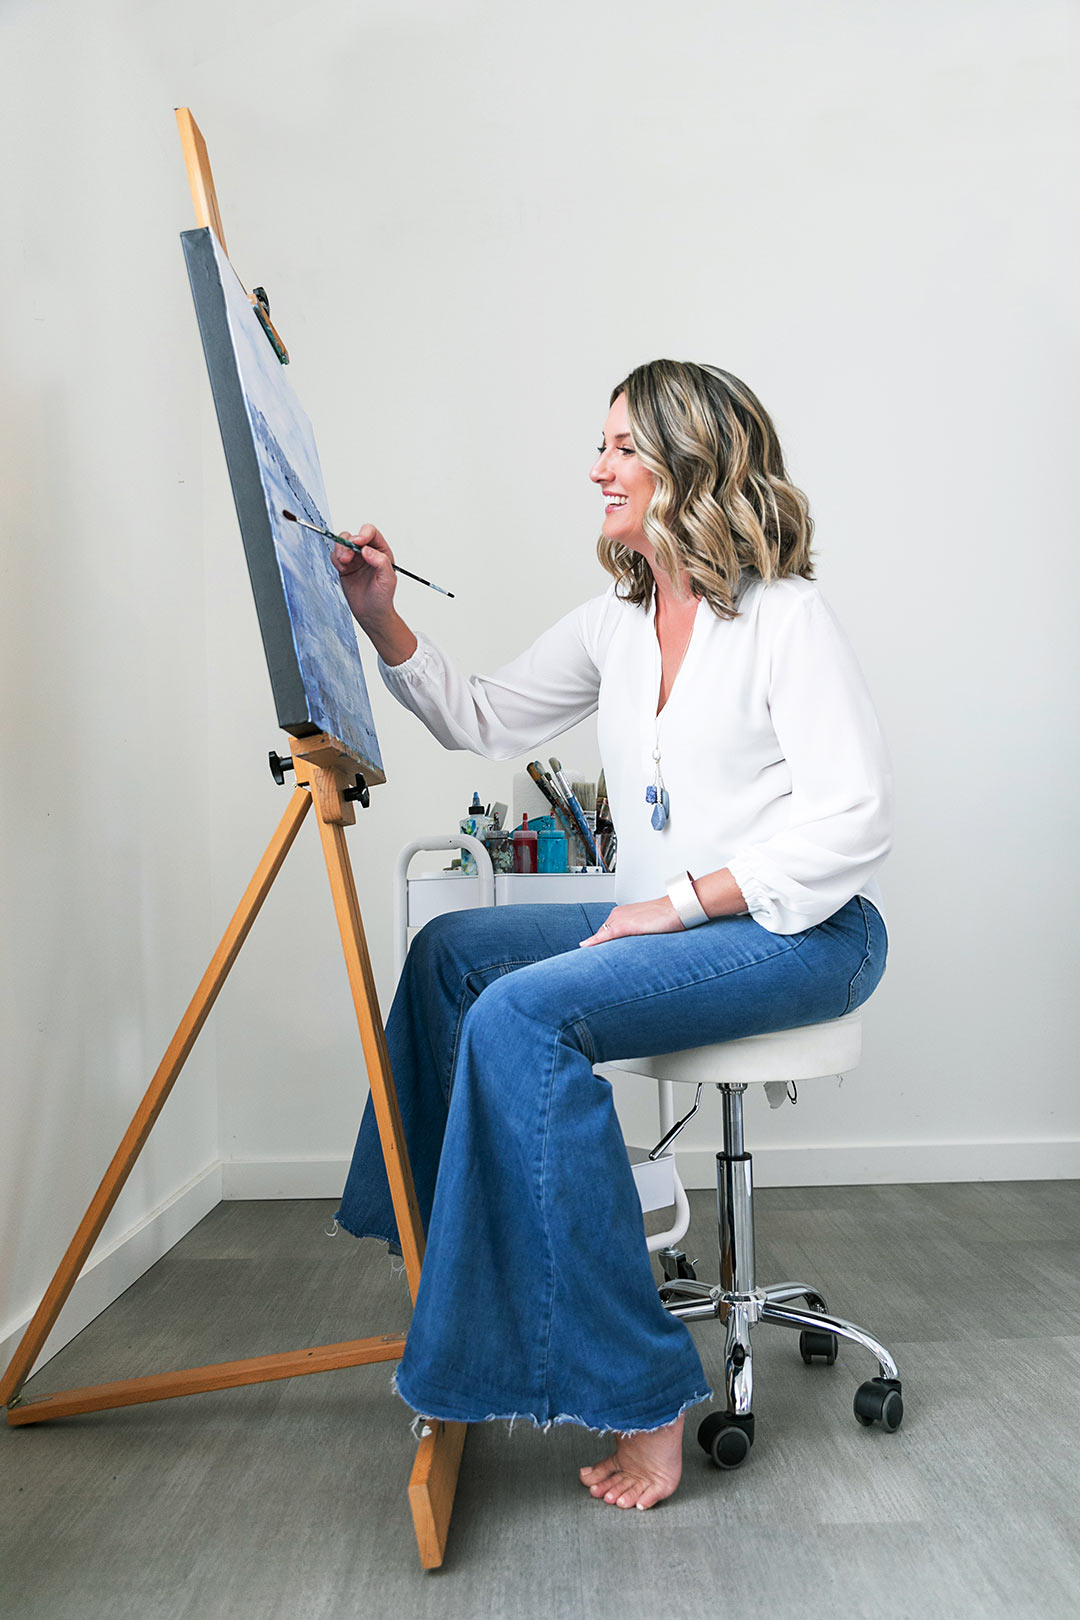 A painter smiles as she paints siting at her easel while having a lifestyle business portrait session done in a studio with Photography by Desirée